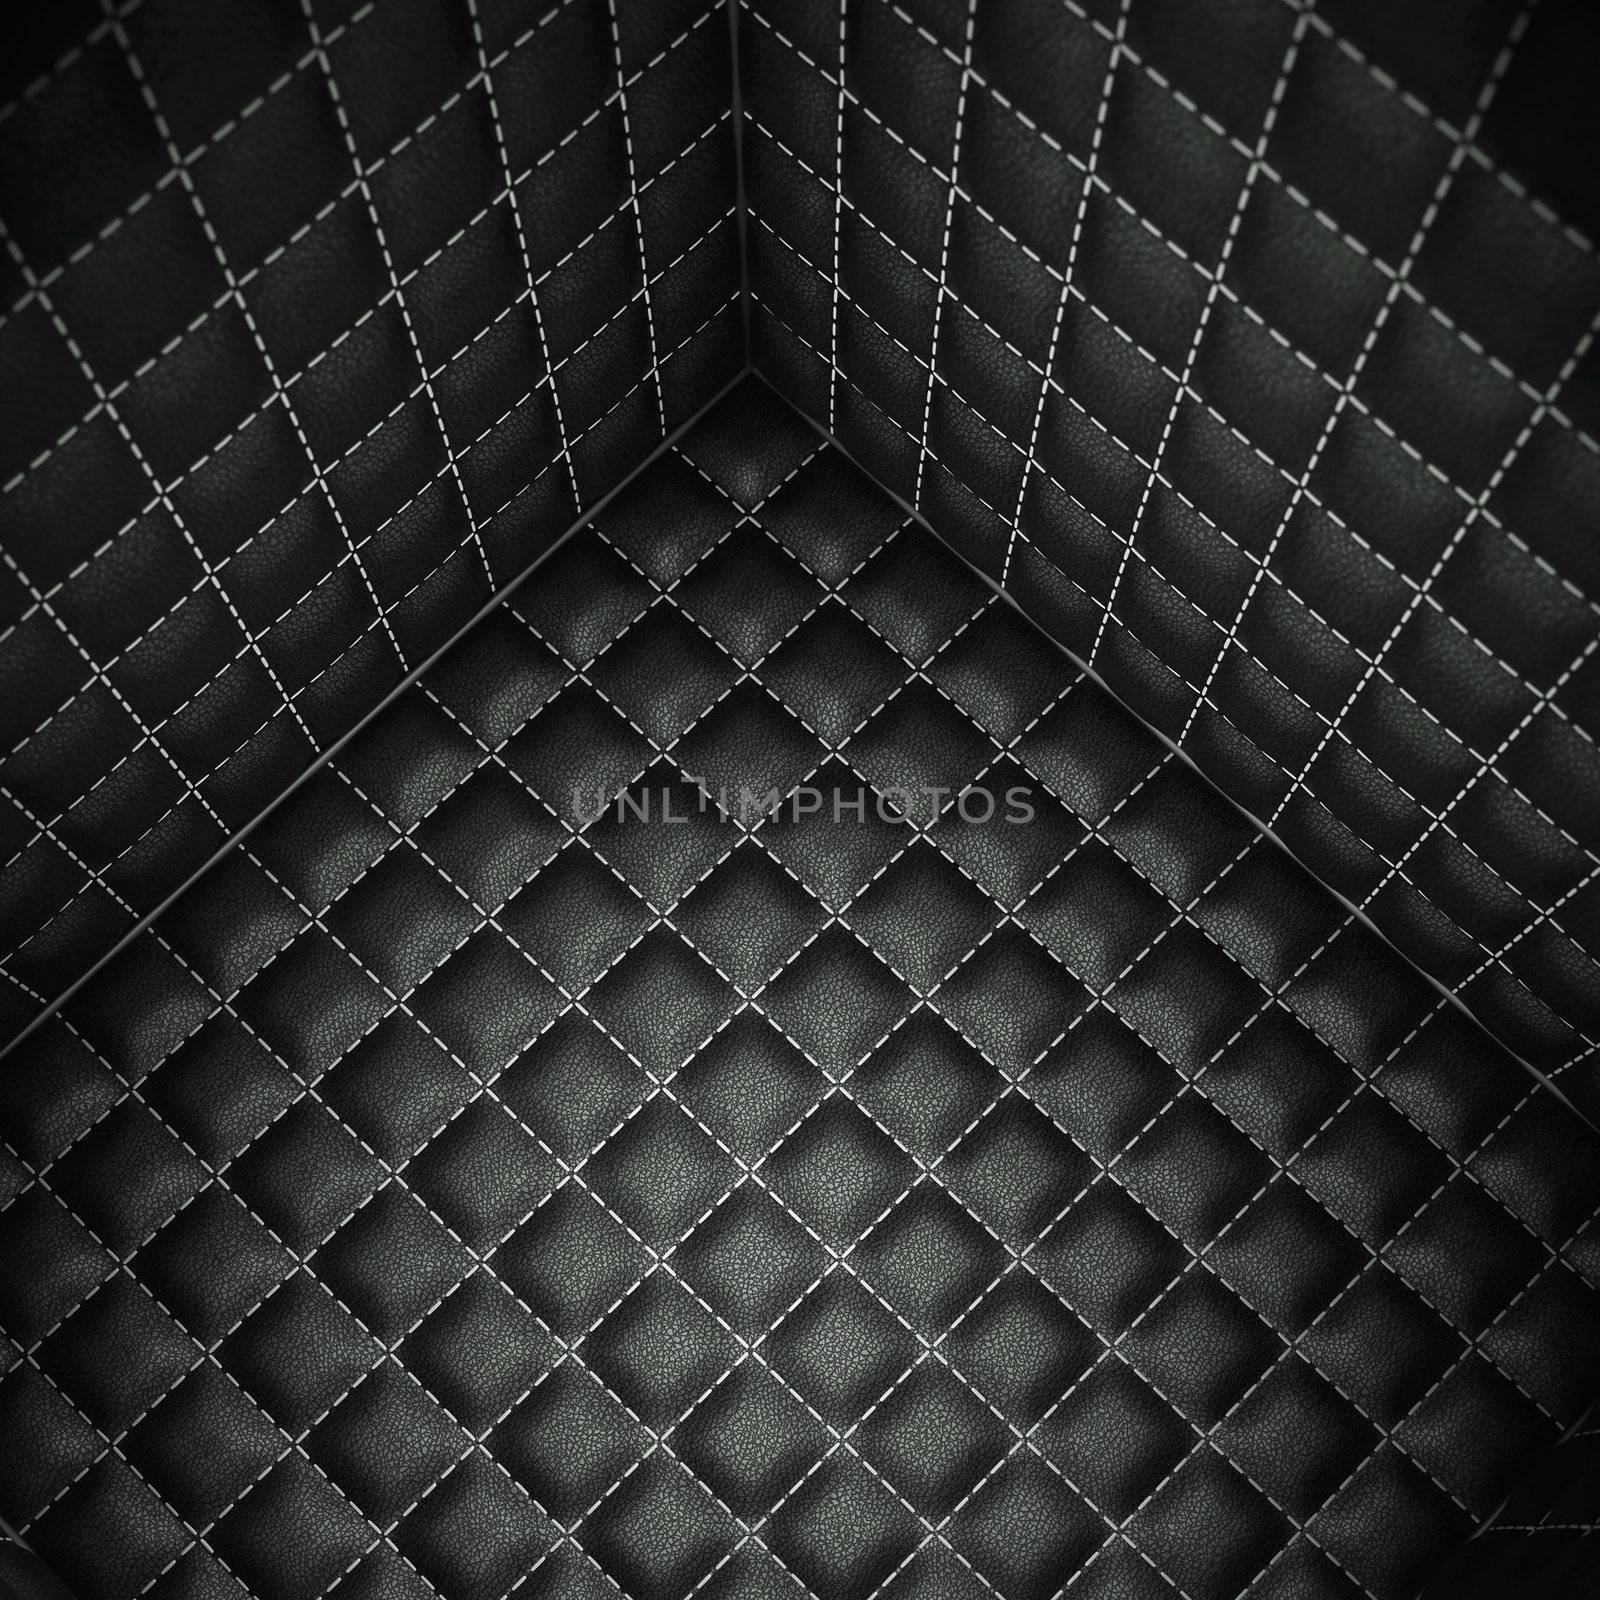 Soft room concept: Isolation and segregation. Black stitched leather pattern